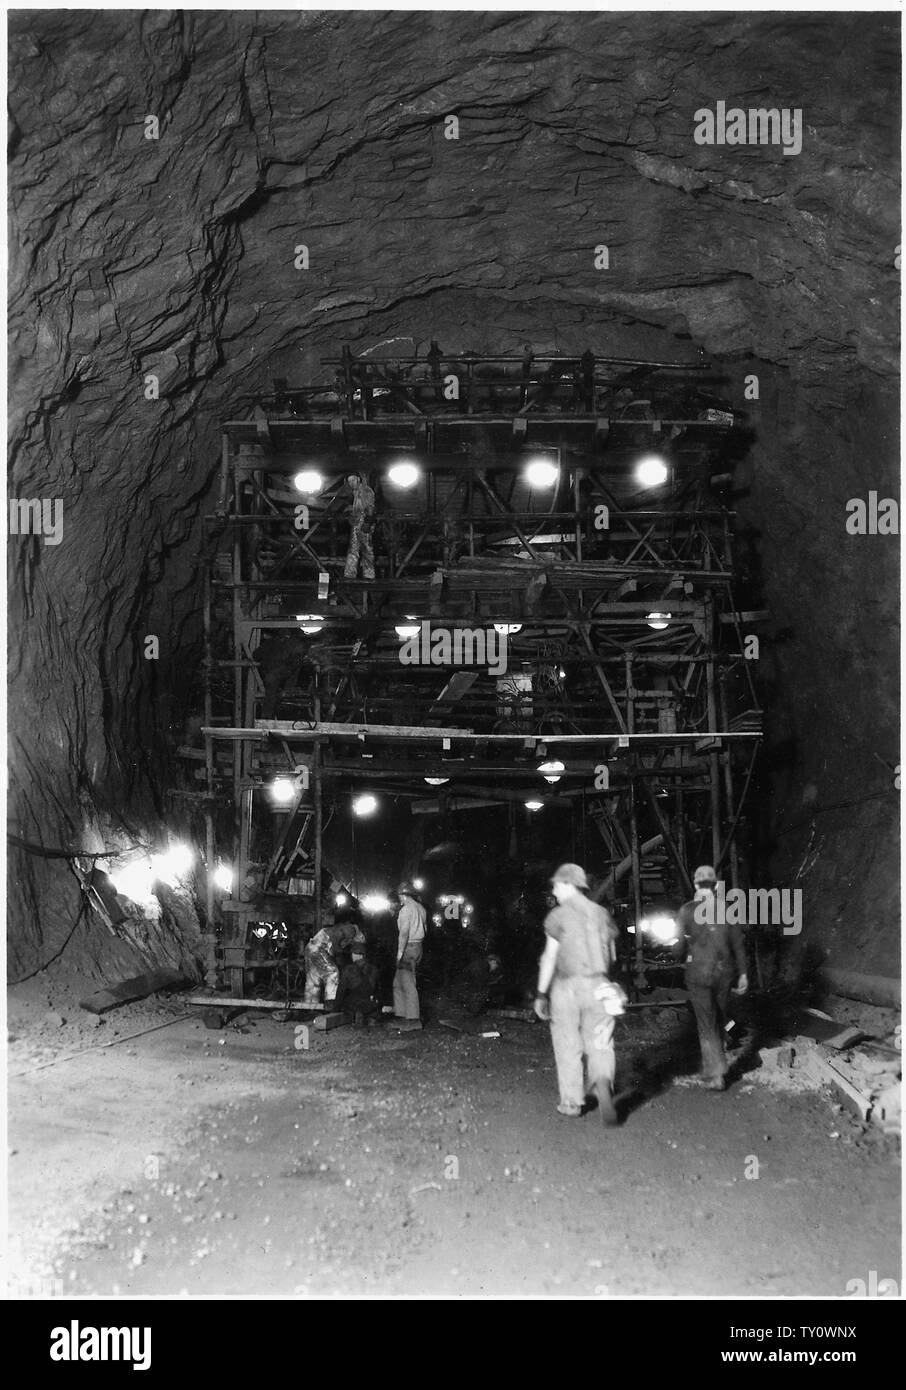 Drilling jumbo used in upper 36 feet of 41-foot diameter upper penstock header. This view shows the drilling face.; Scope and content:  Photograph from Volume Two of a series of photo albums documenting the construction of Hoover Dam, Boulder City, Nevada. Stock Photo